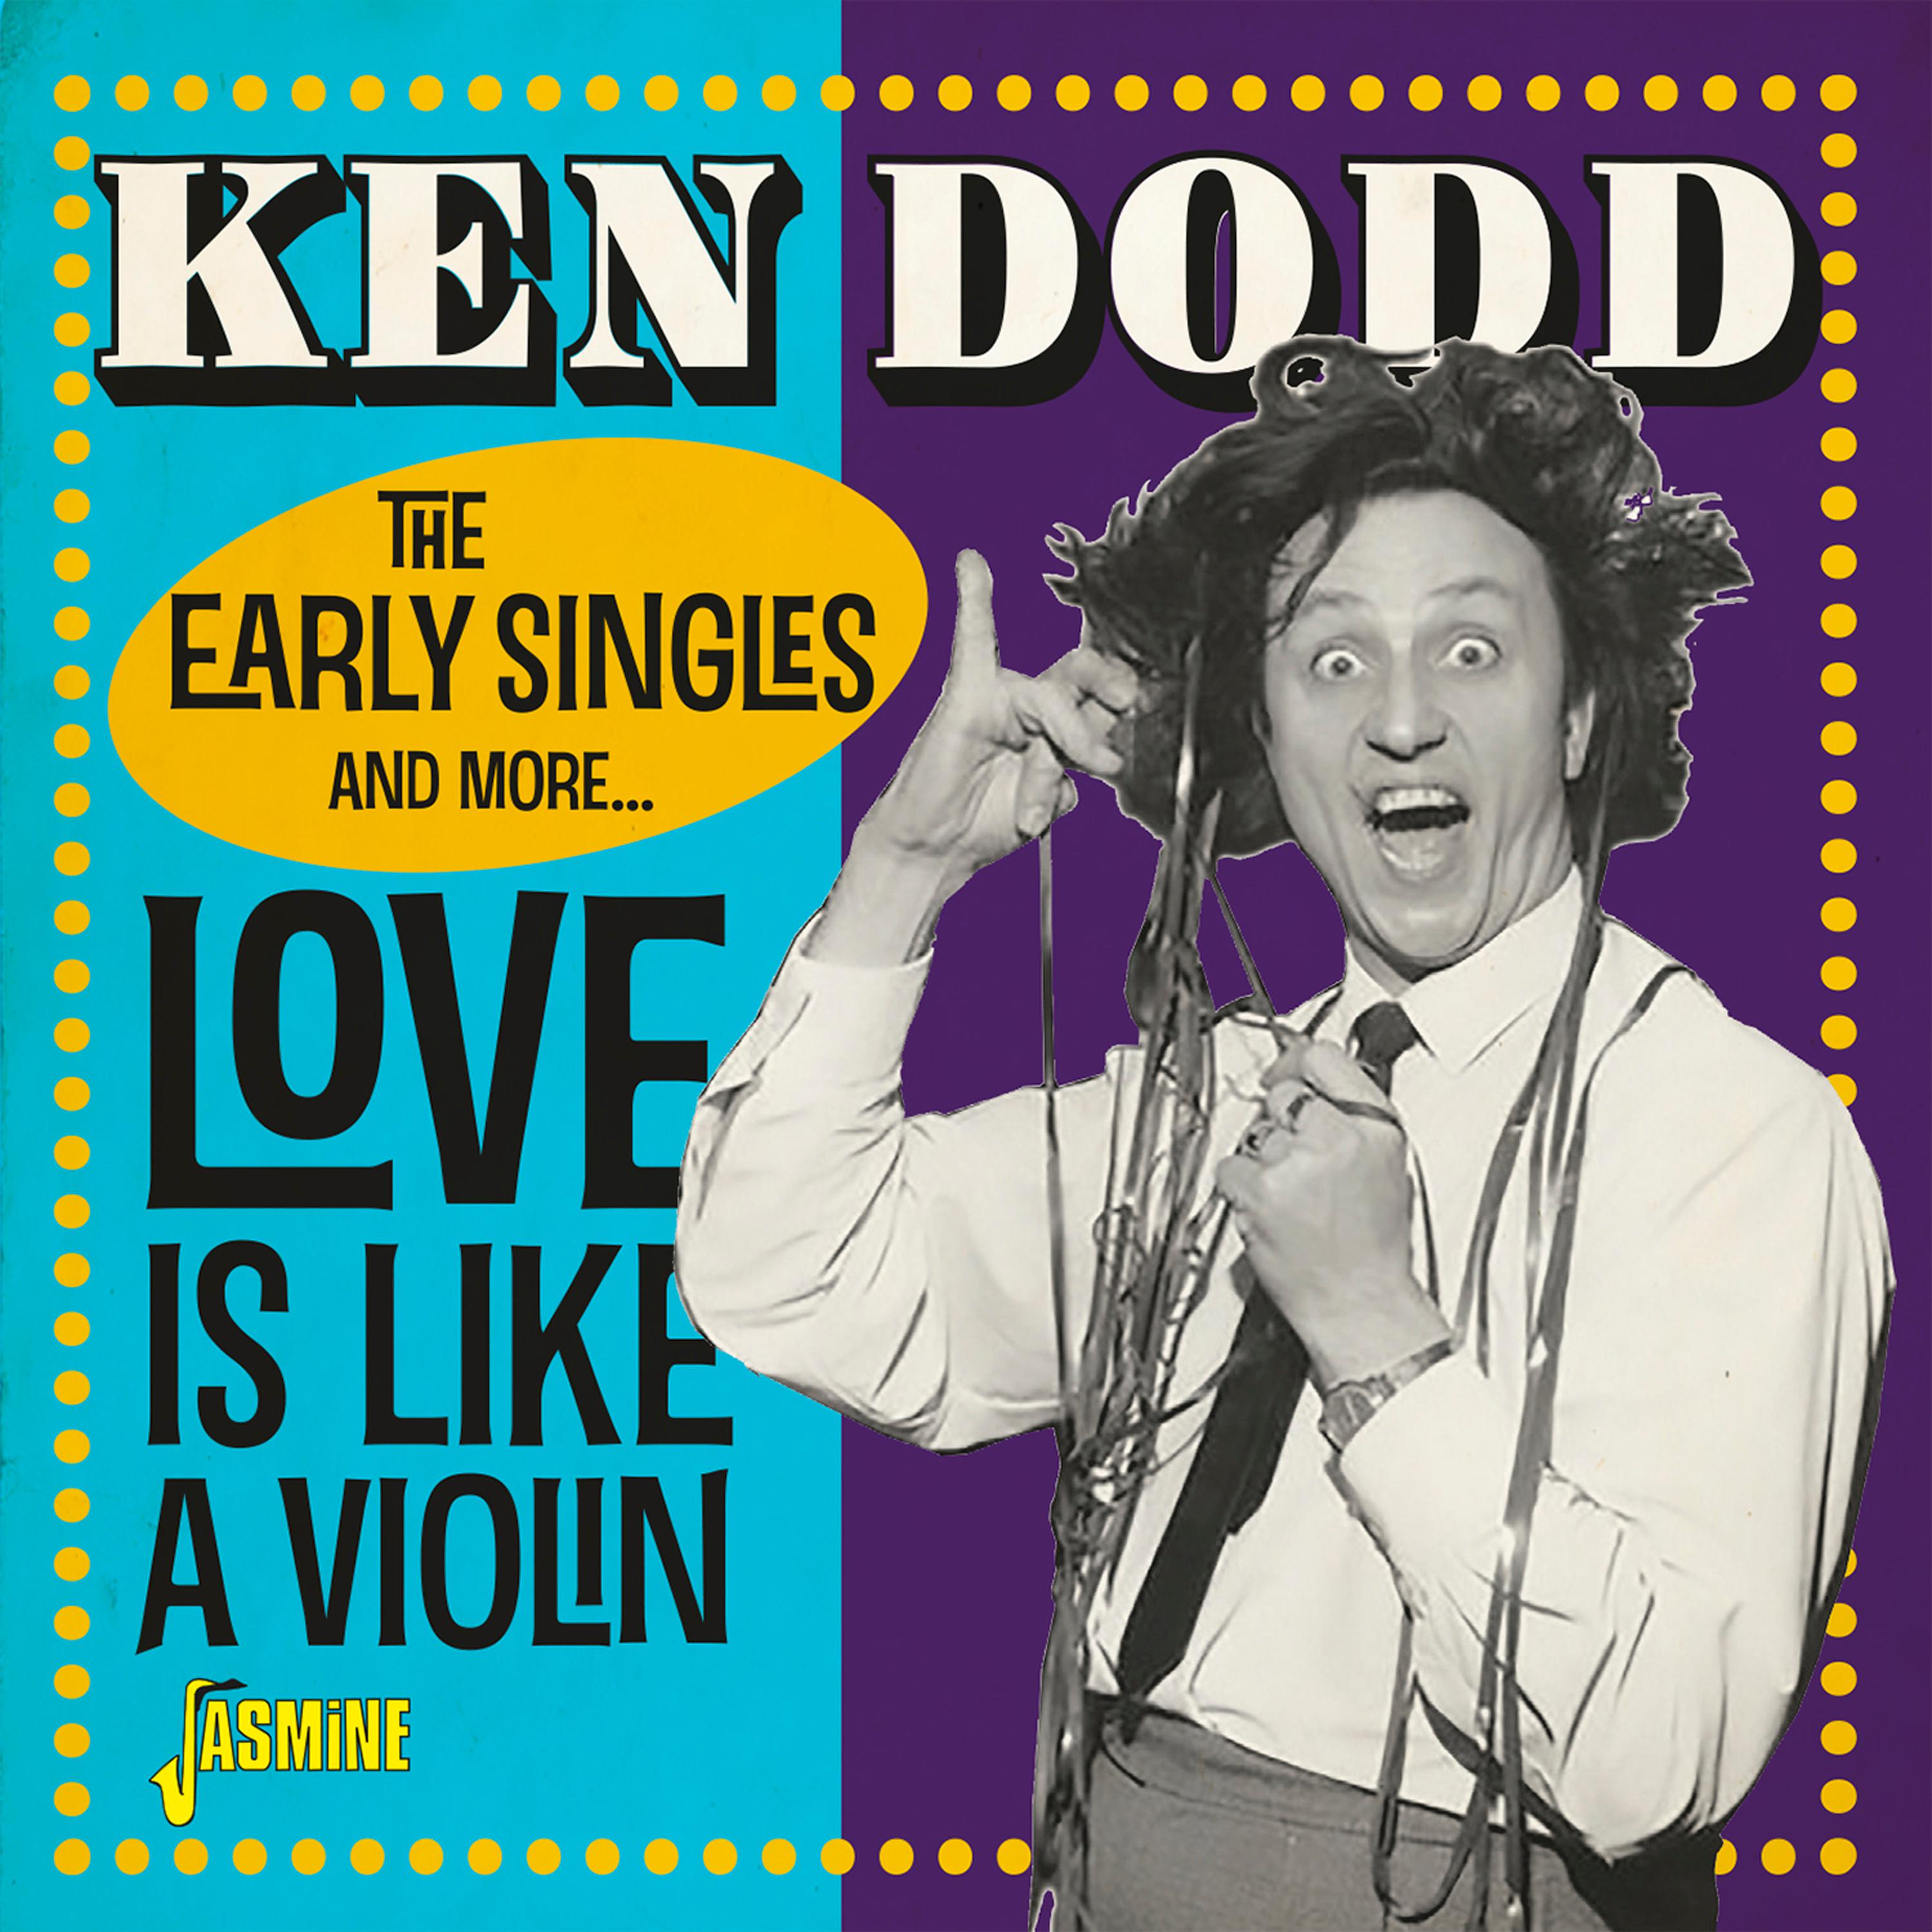 Ken Dodd - The More I See You